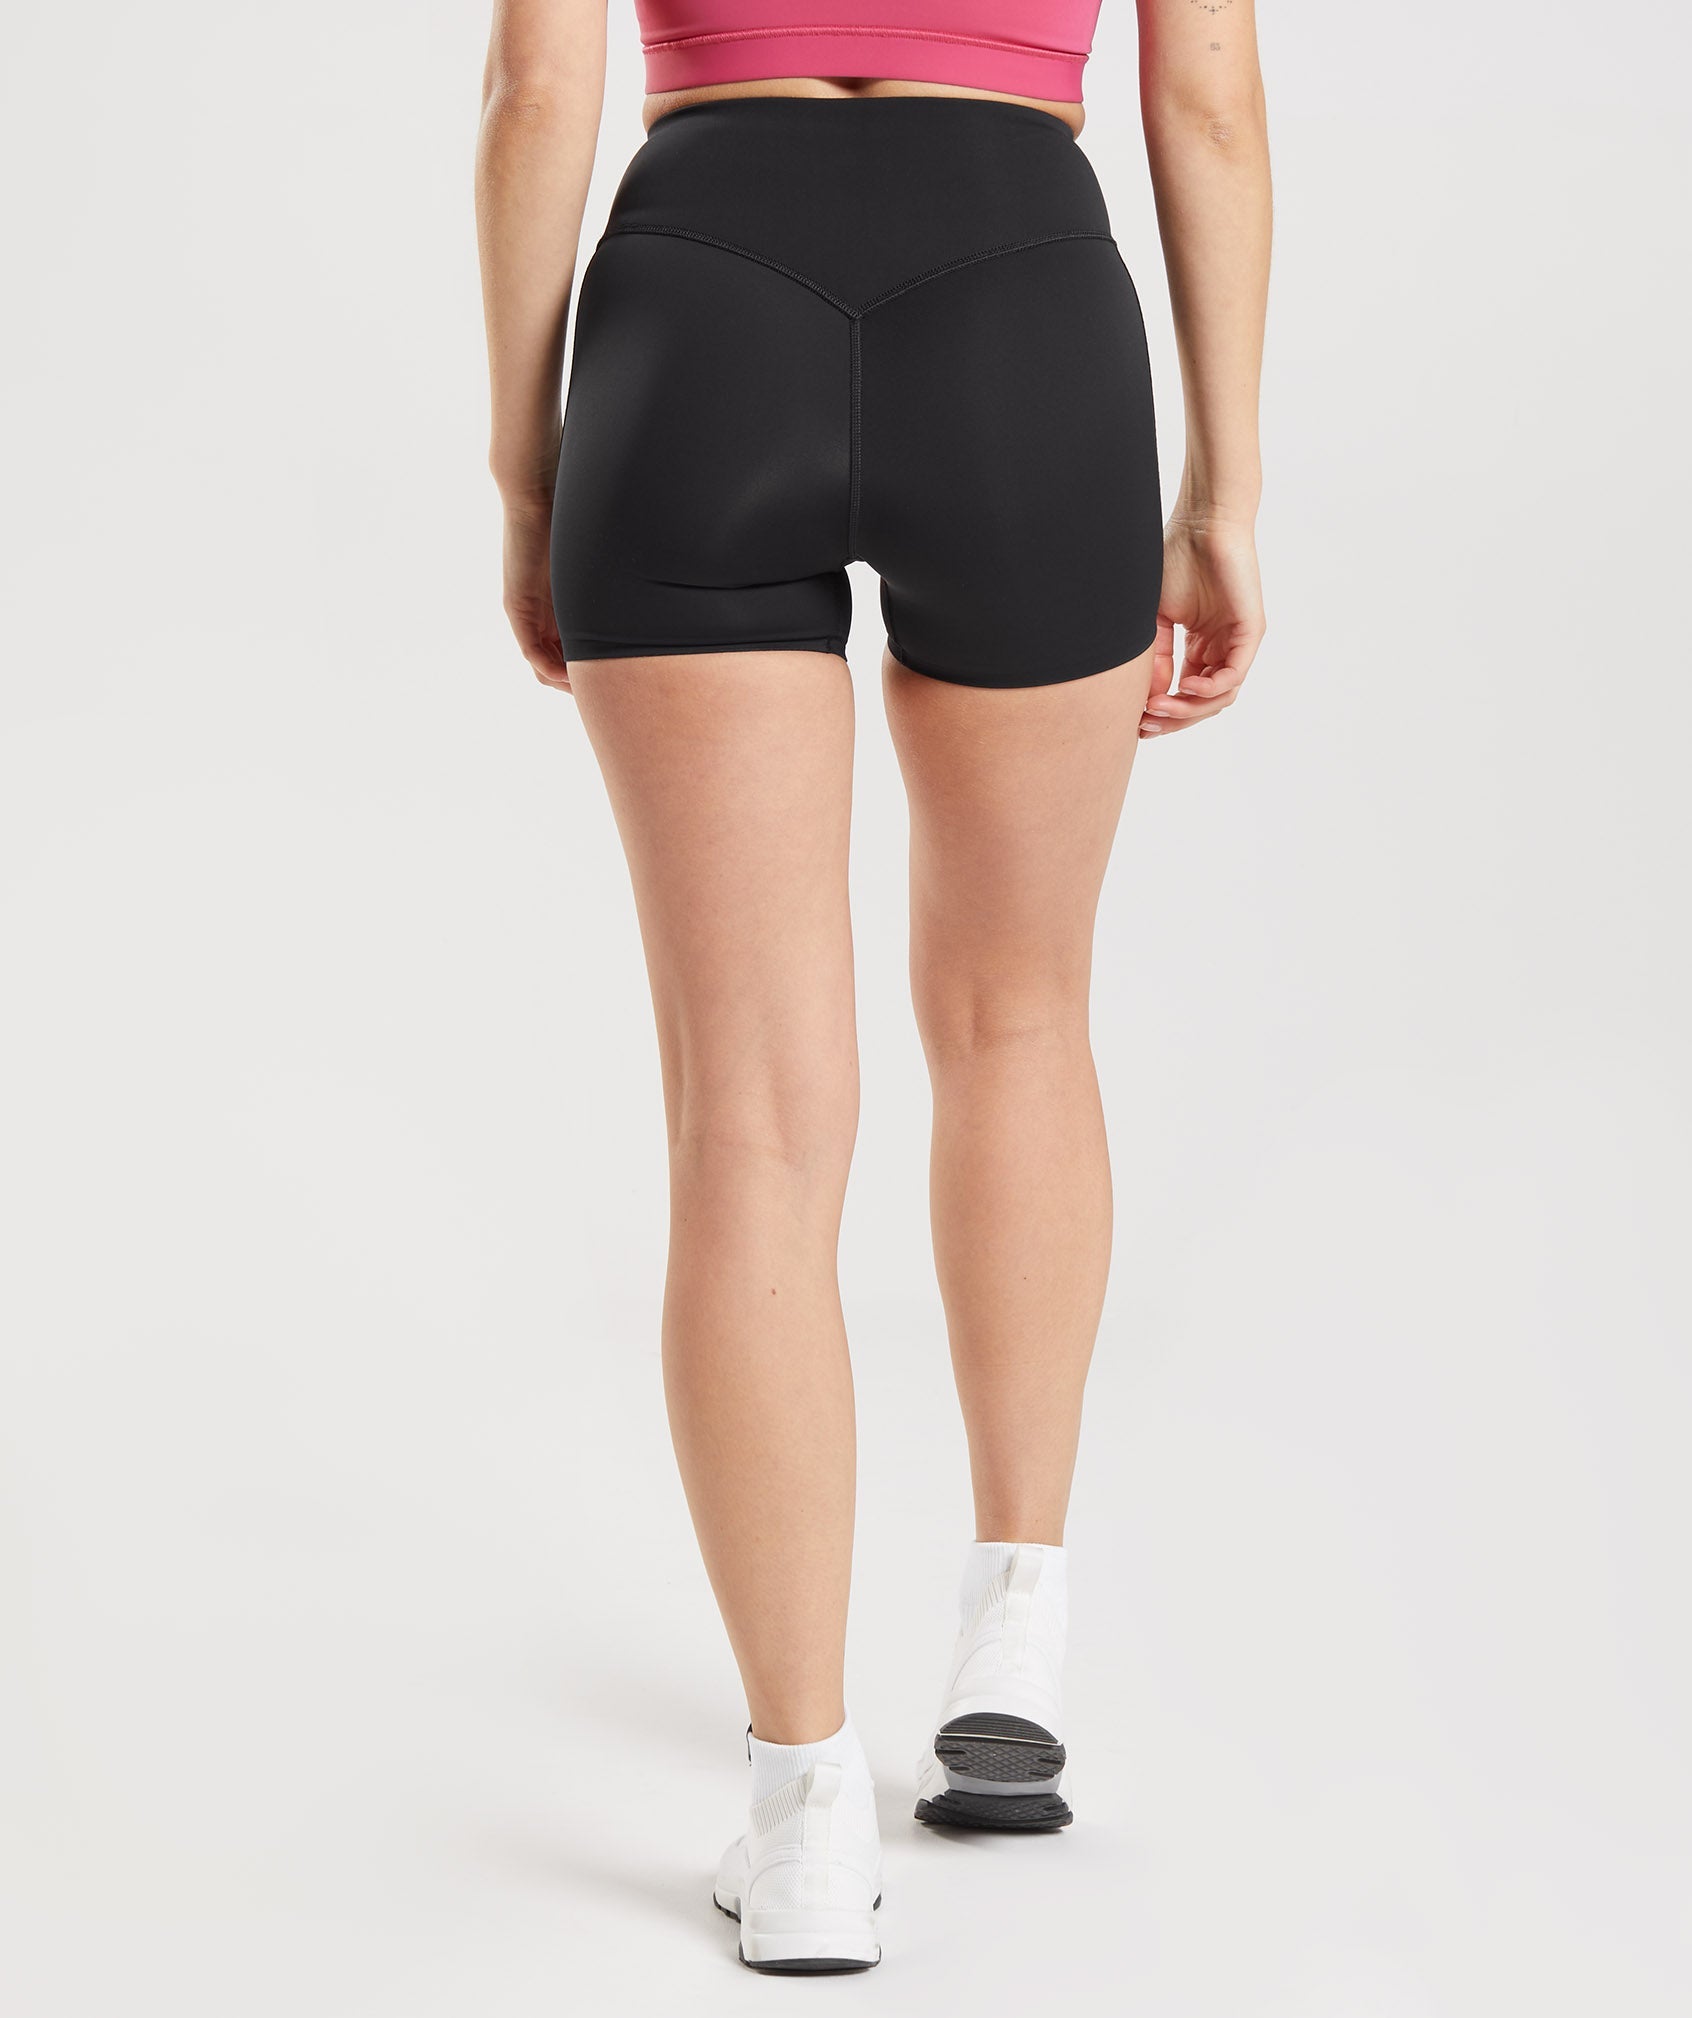 Gymshark Pocket Shorts - Raspberry Pink  Shorts with pockets, Flattering  fit, How to wear